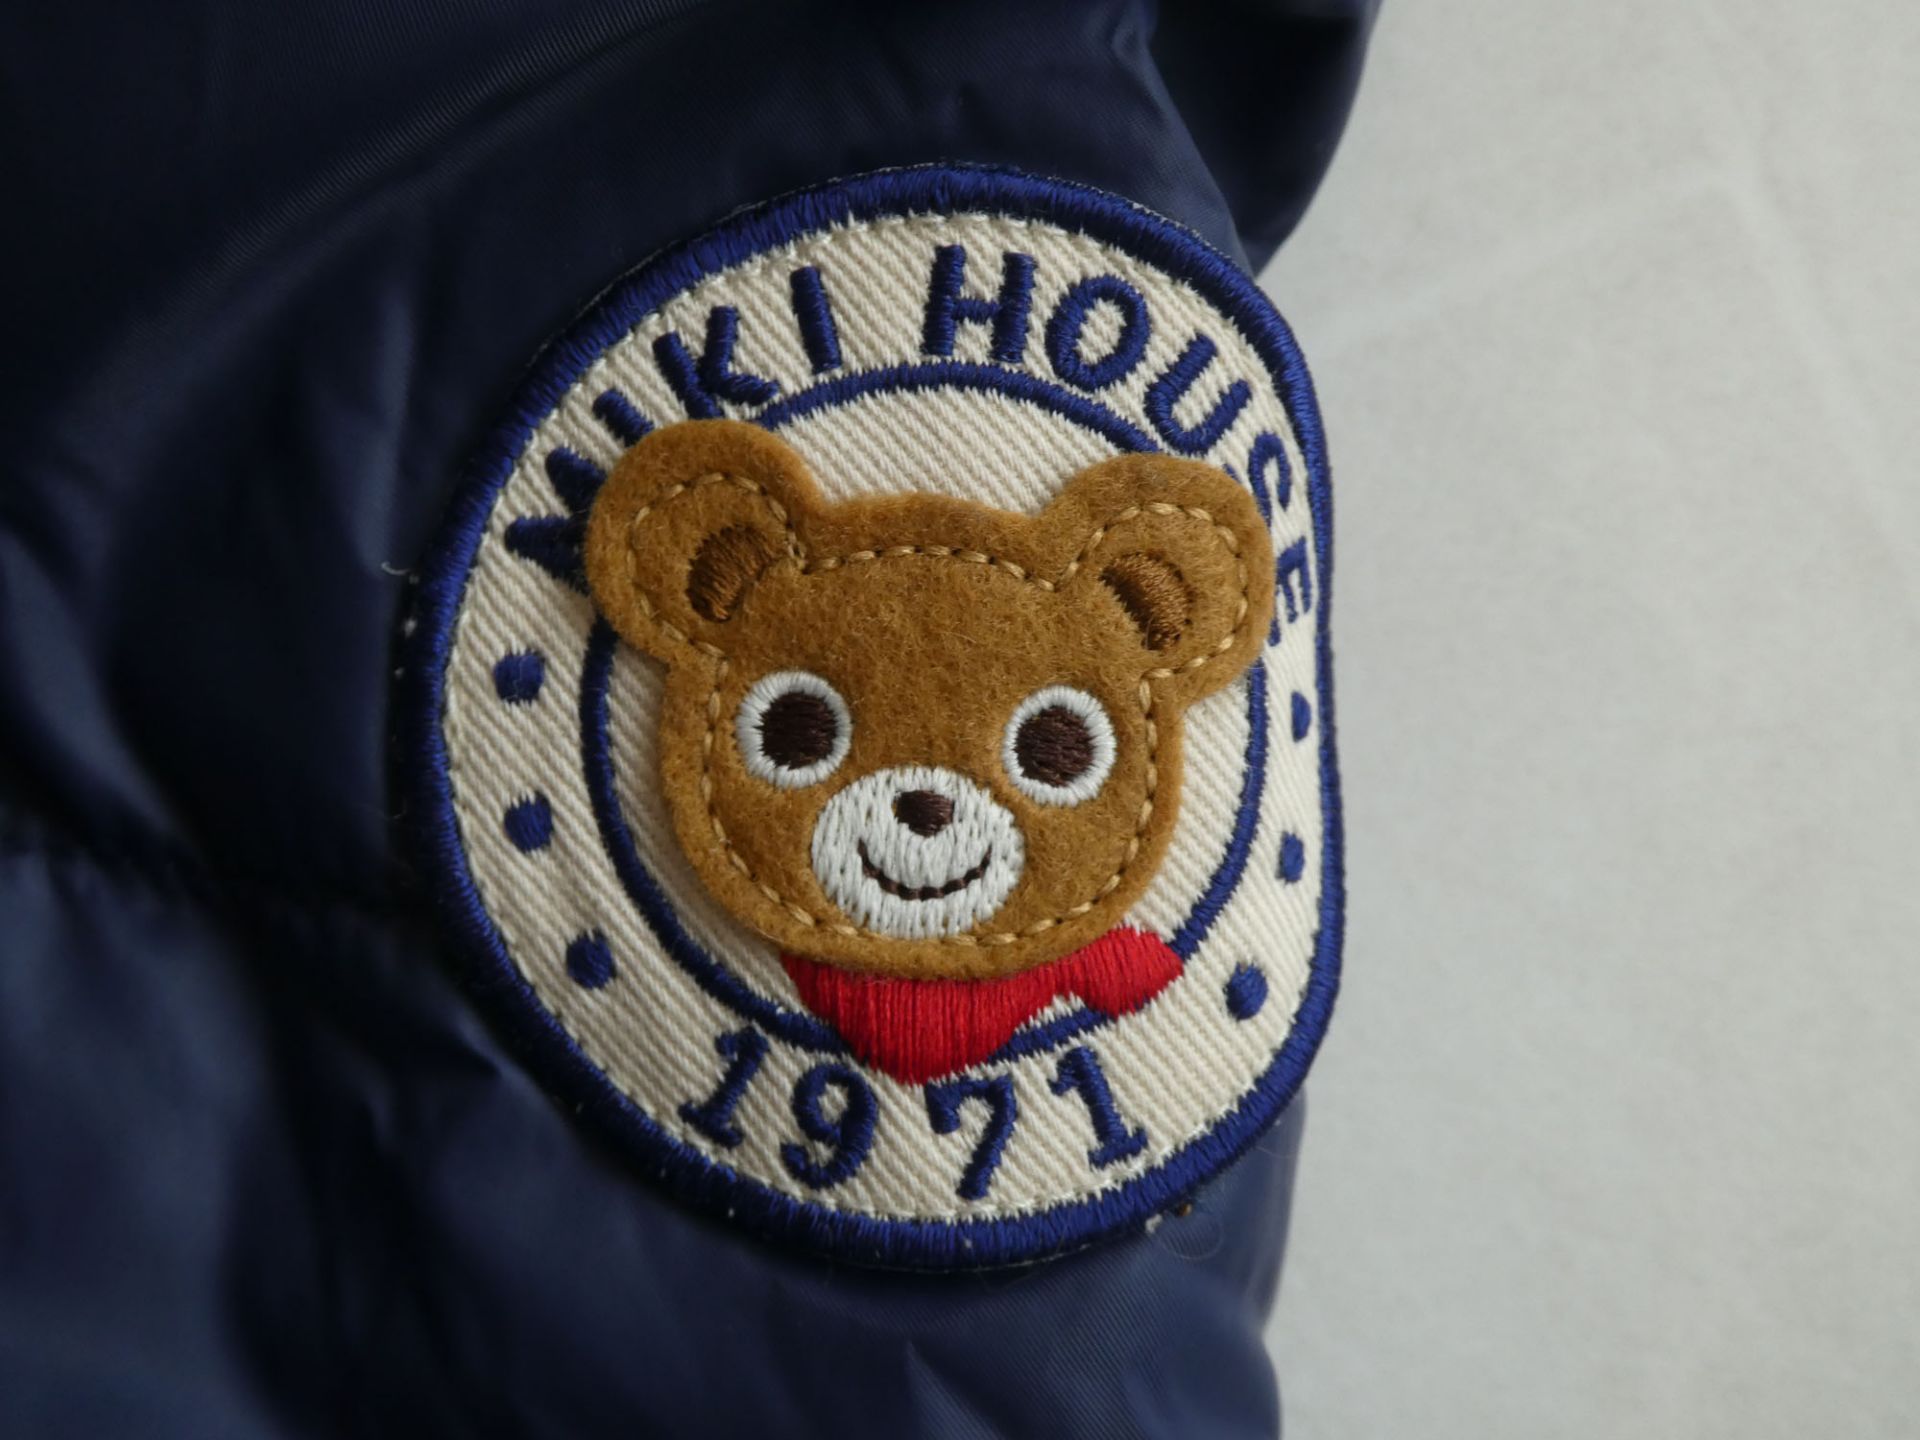 Miki House original 2 in 1 navy puffer jacket and fleece bodywarmer child's size 90 (2 years old) - Image 2 of 3